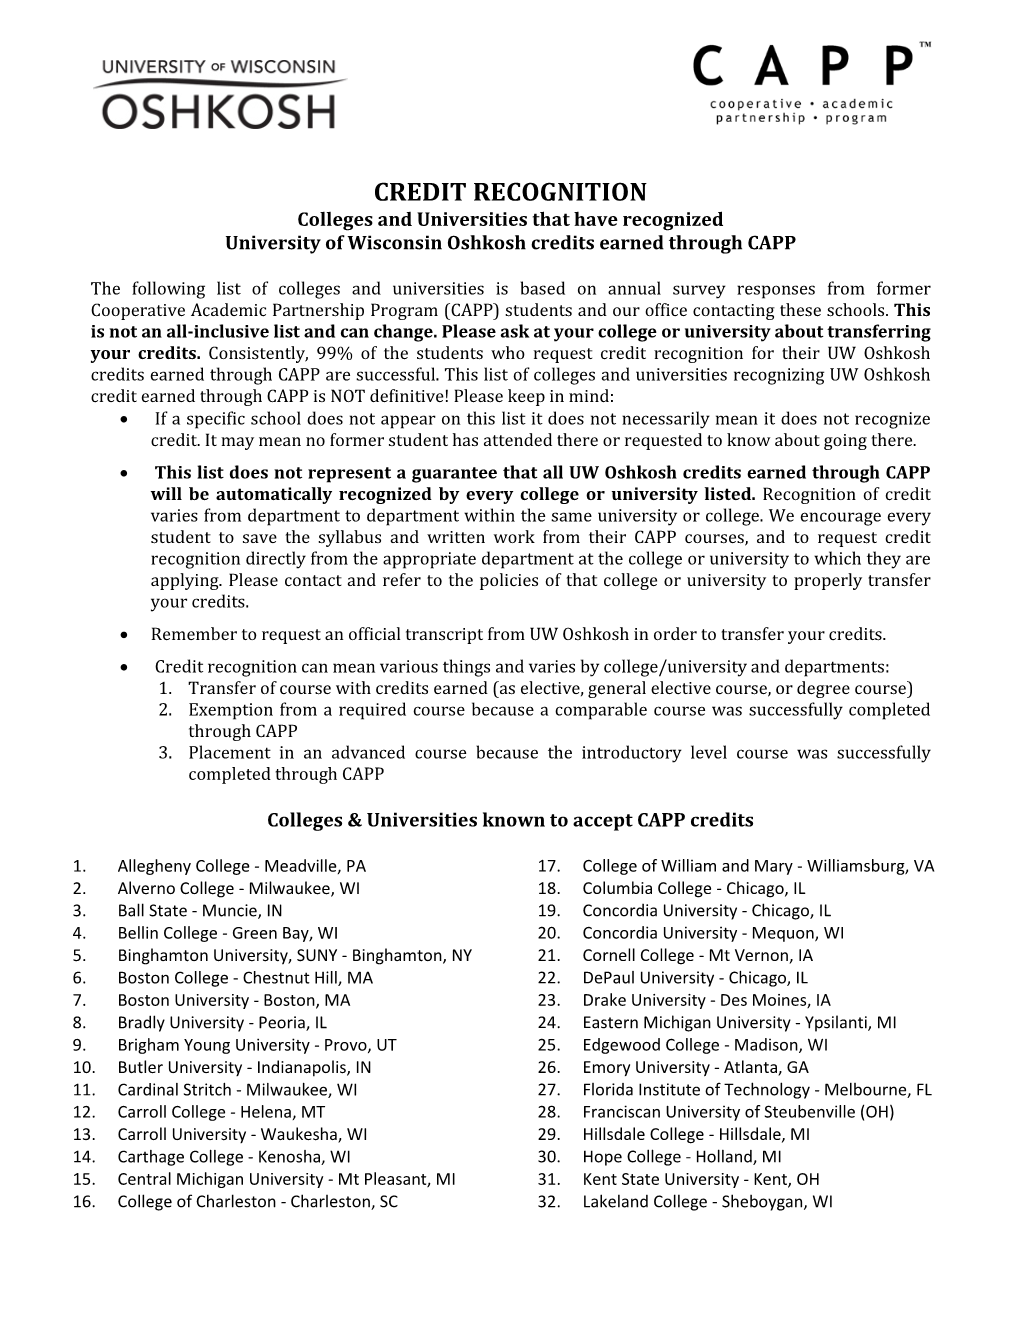 CREDIT RECOGNITION Colleges and Universities That Have Recognized University of Wisconsin Oshkosh Credits Earned Through CAPP